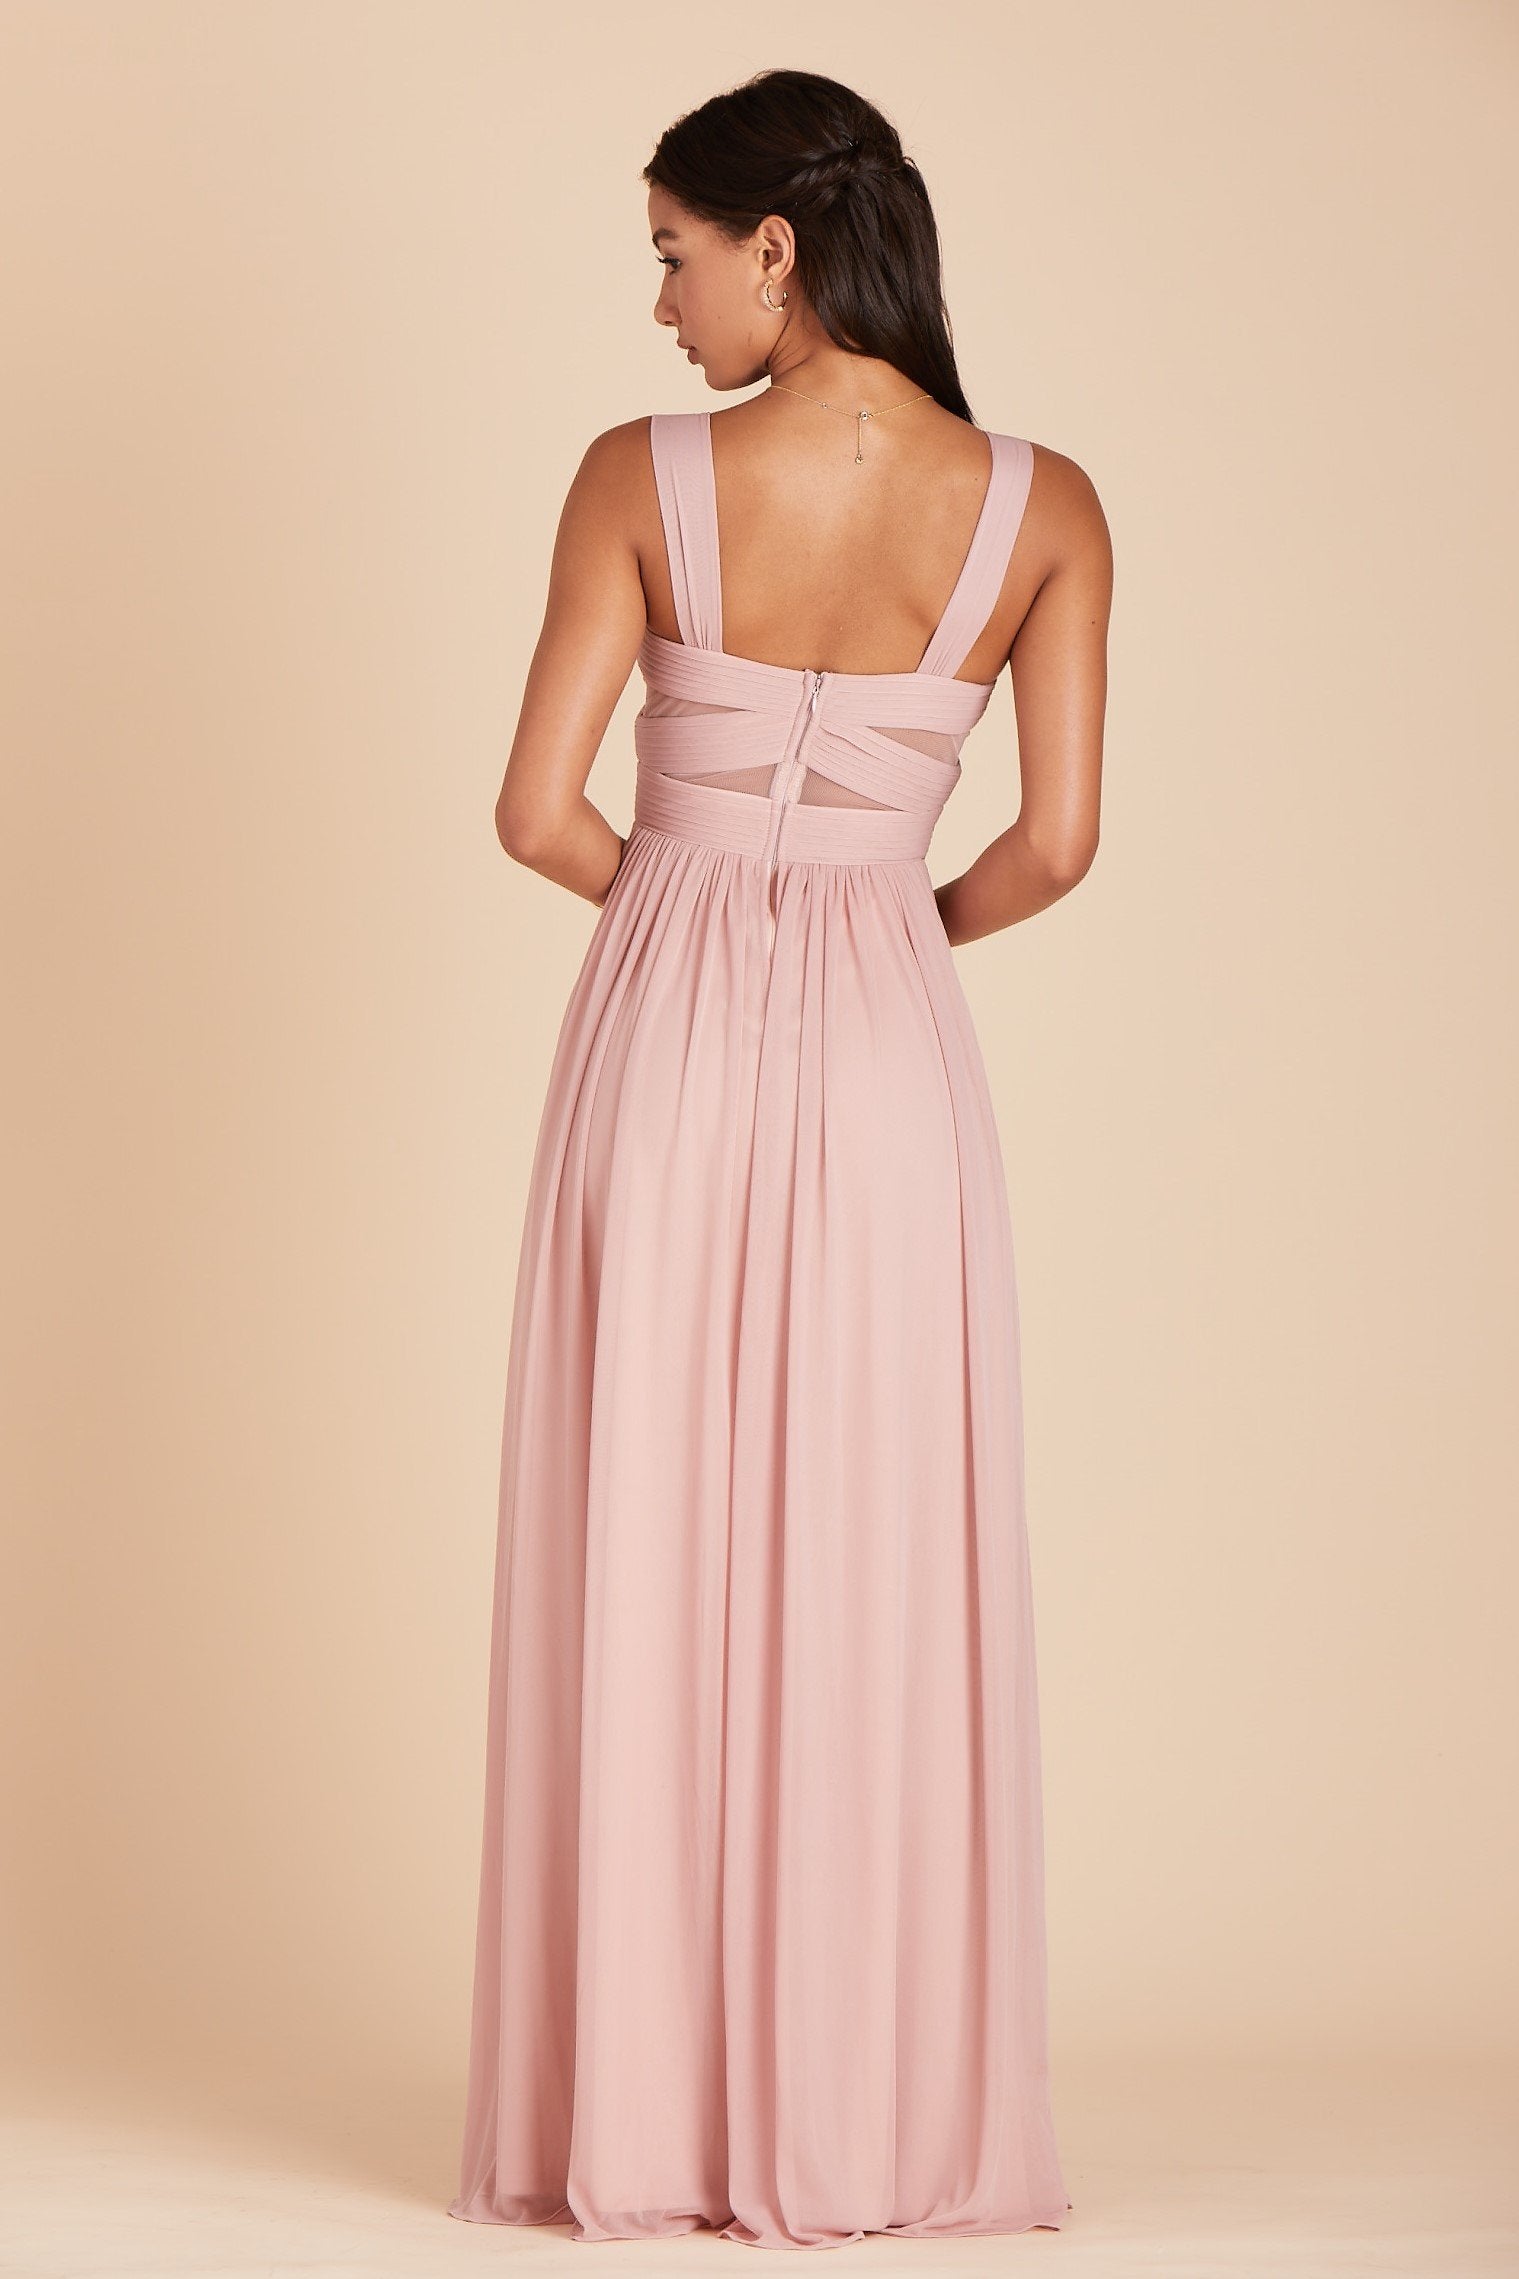 Back view of the Elsye Bridesmaid Dress in dusty rose mesh reveals a square cut just below the shoulder blades and the pleated column skirt gracefully flowing to the floor.